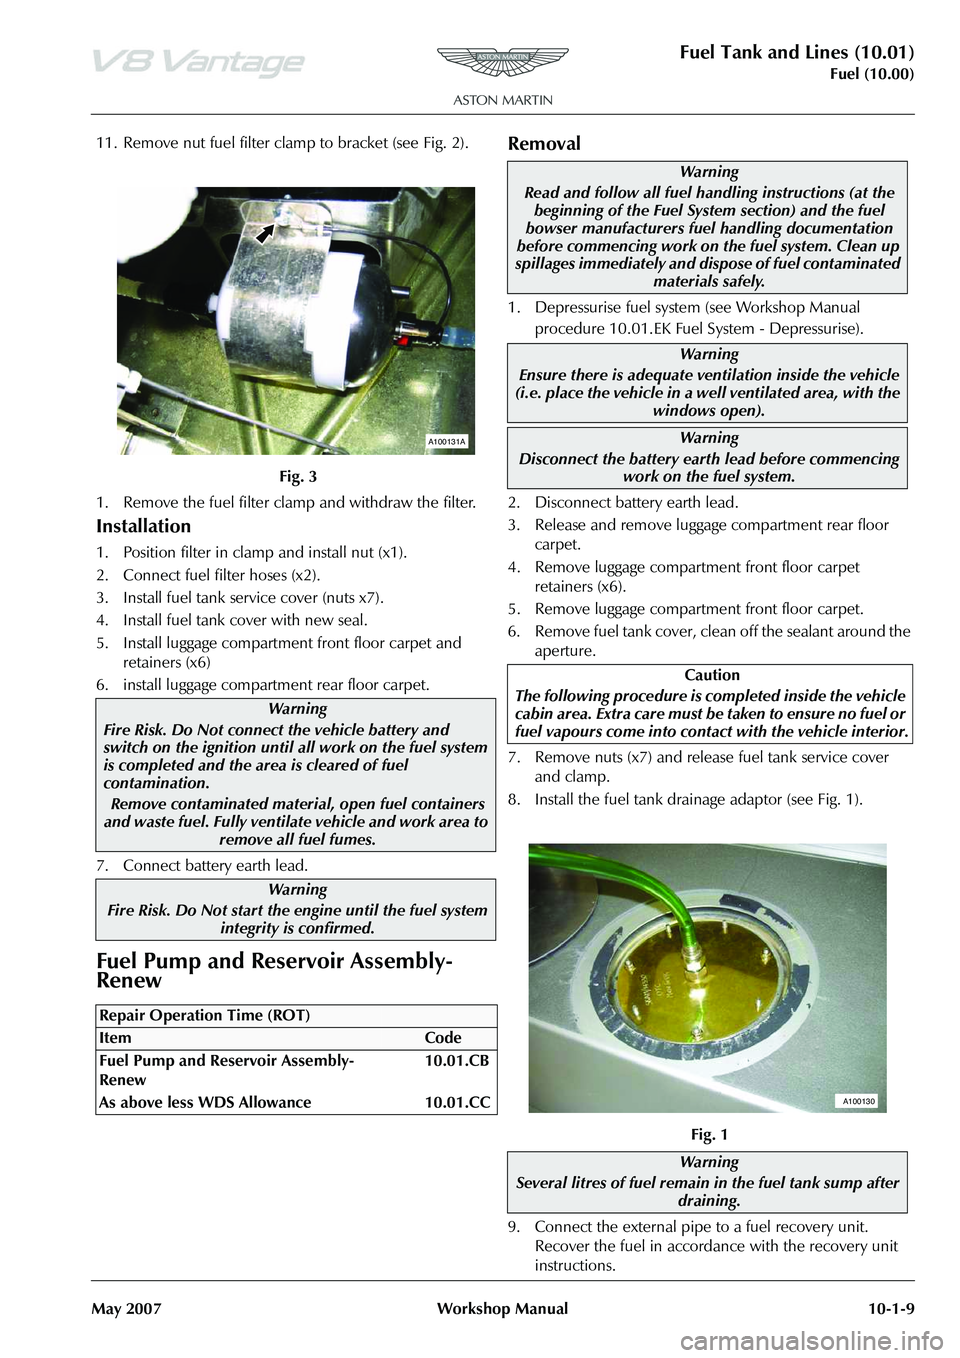 ASTON MARTIN V8 VANTAGE 2010  Workshop Manual Fuel Tank and Lines (10.01)
Fuel (10.00)
May 2007 Workshop Manual 10-1-9
11. Remove nut fuel filter clamp to bracket (see Fig. 2).
1. Remove the fuel filter clamp and withdraw the filter.
Installation